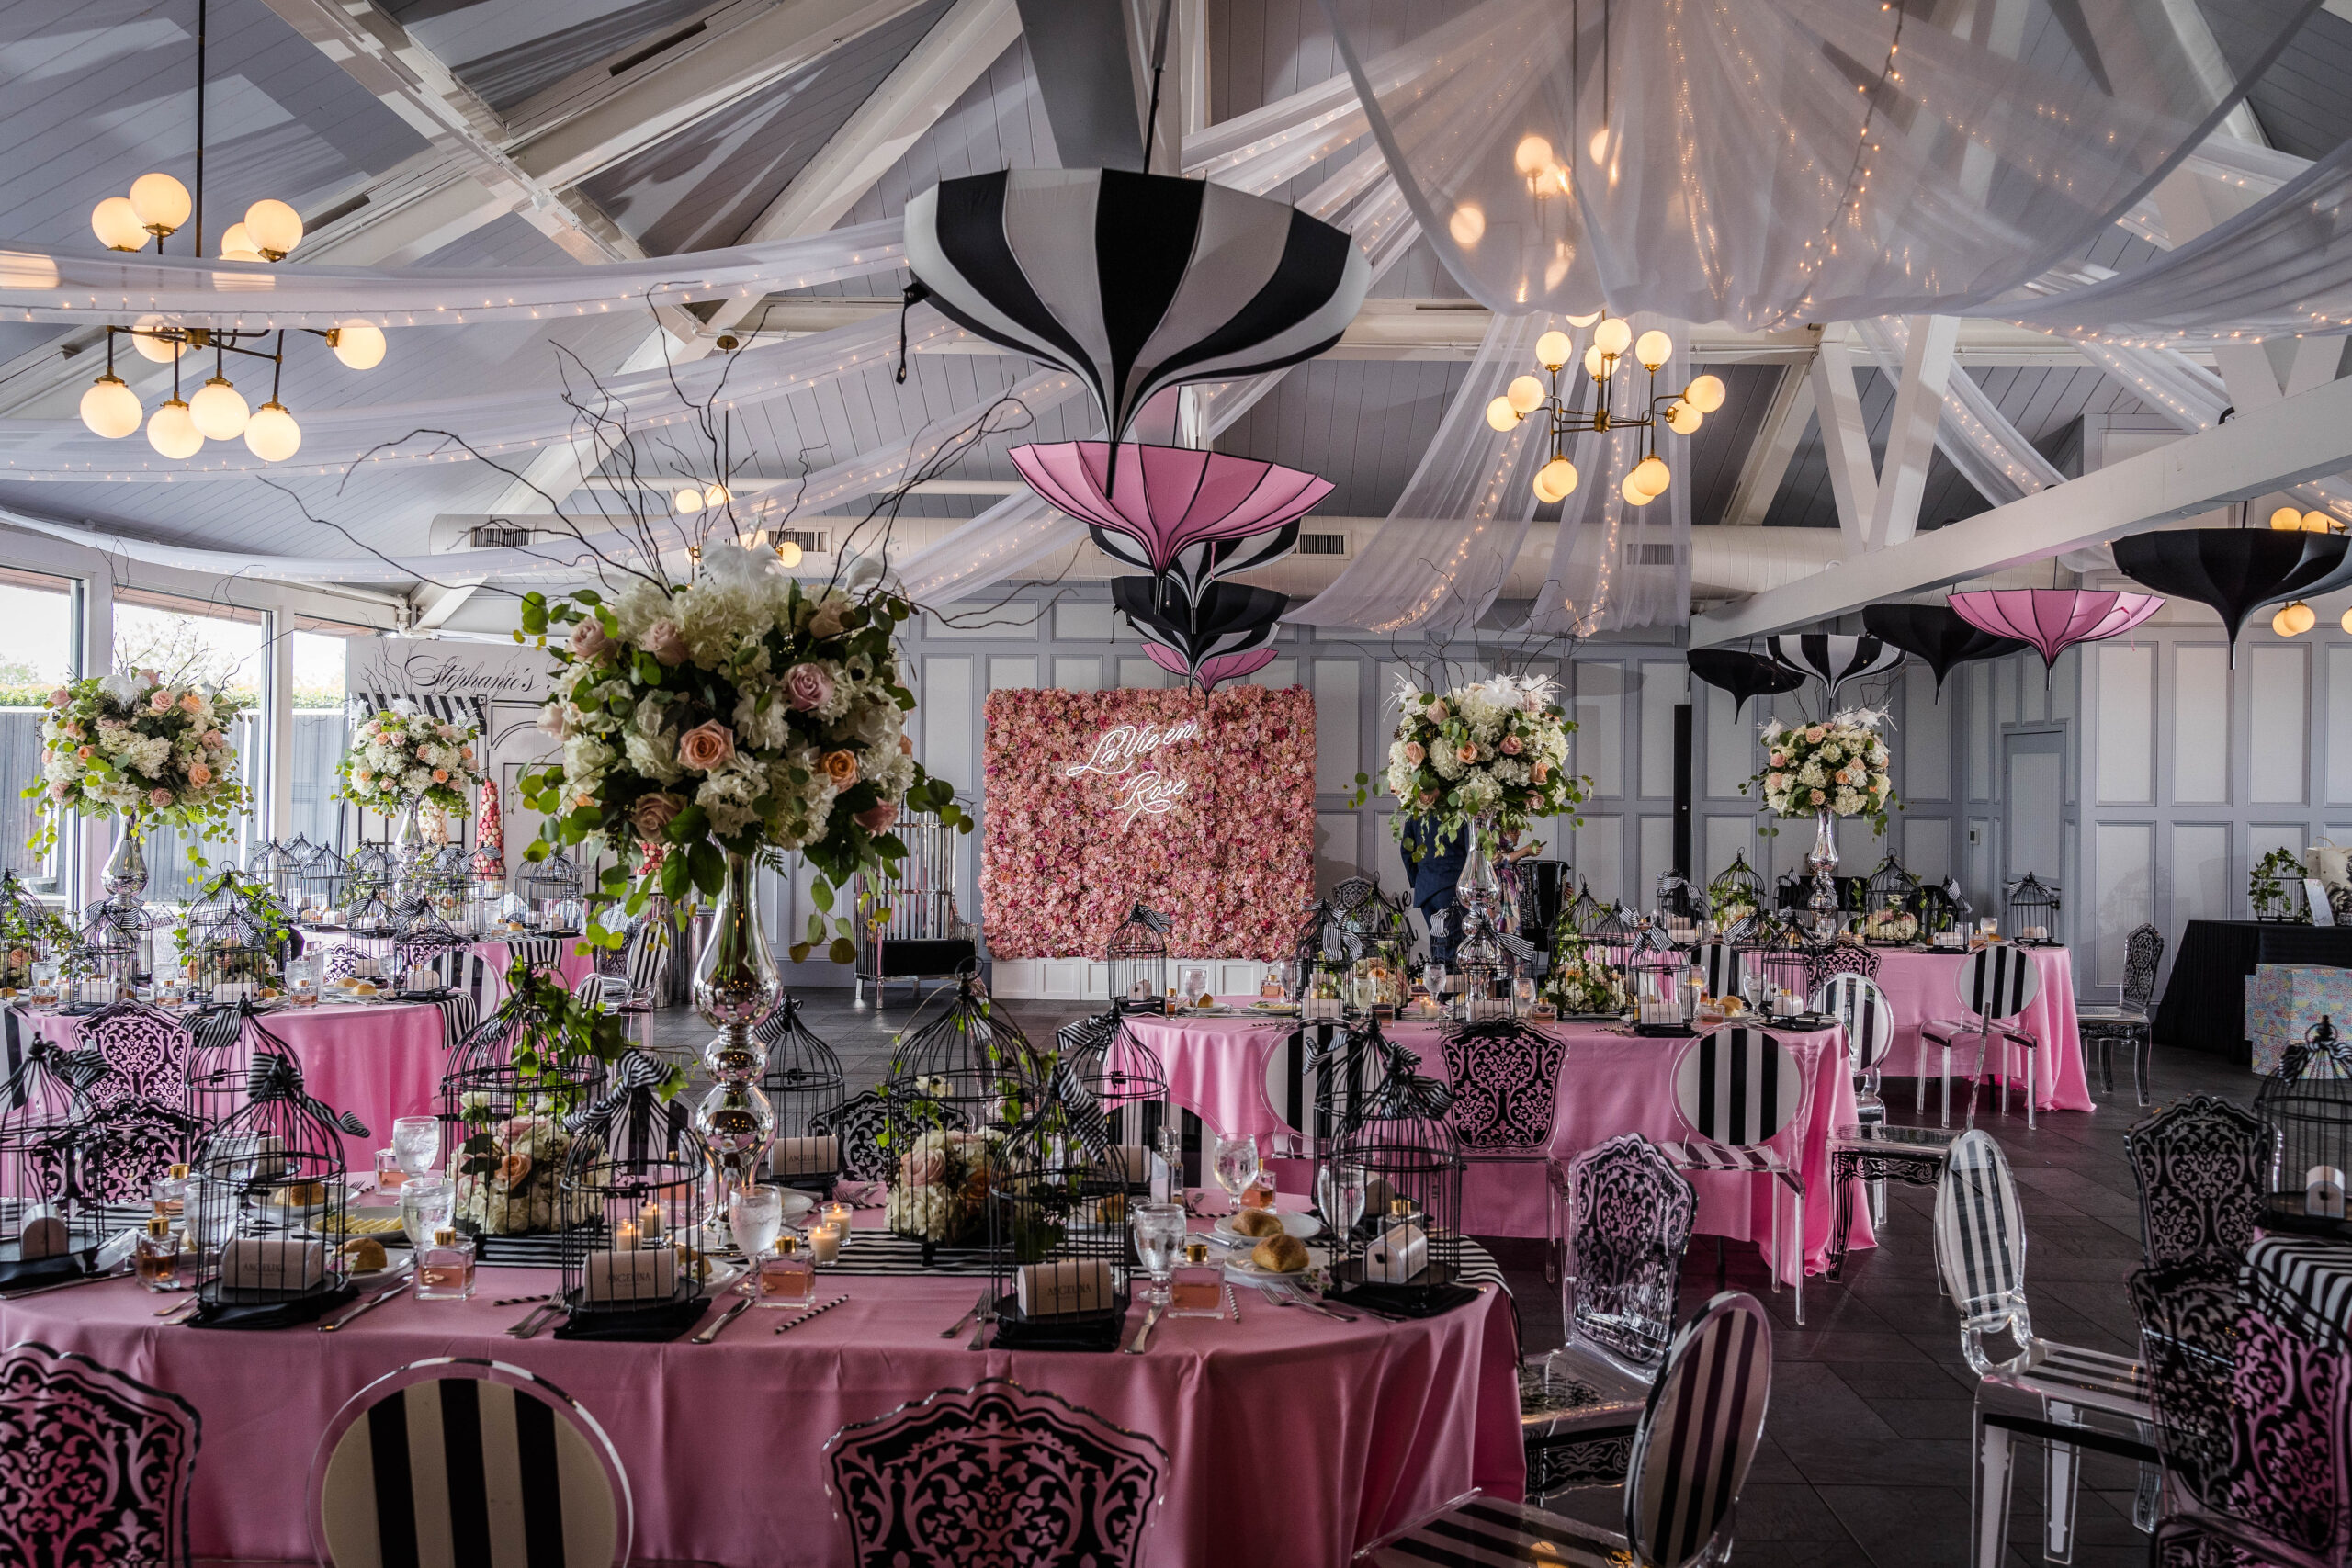 The Liberty House morphed into a Parisian-themed bridal shower with pink and black decor.